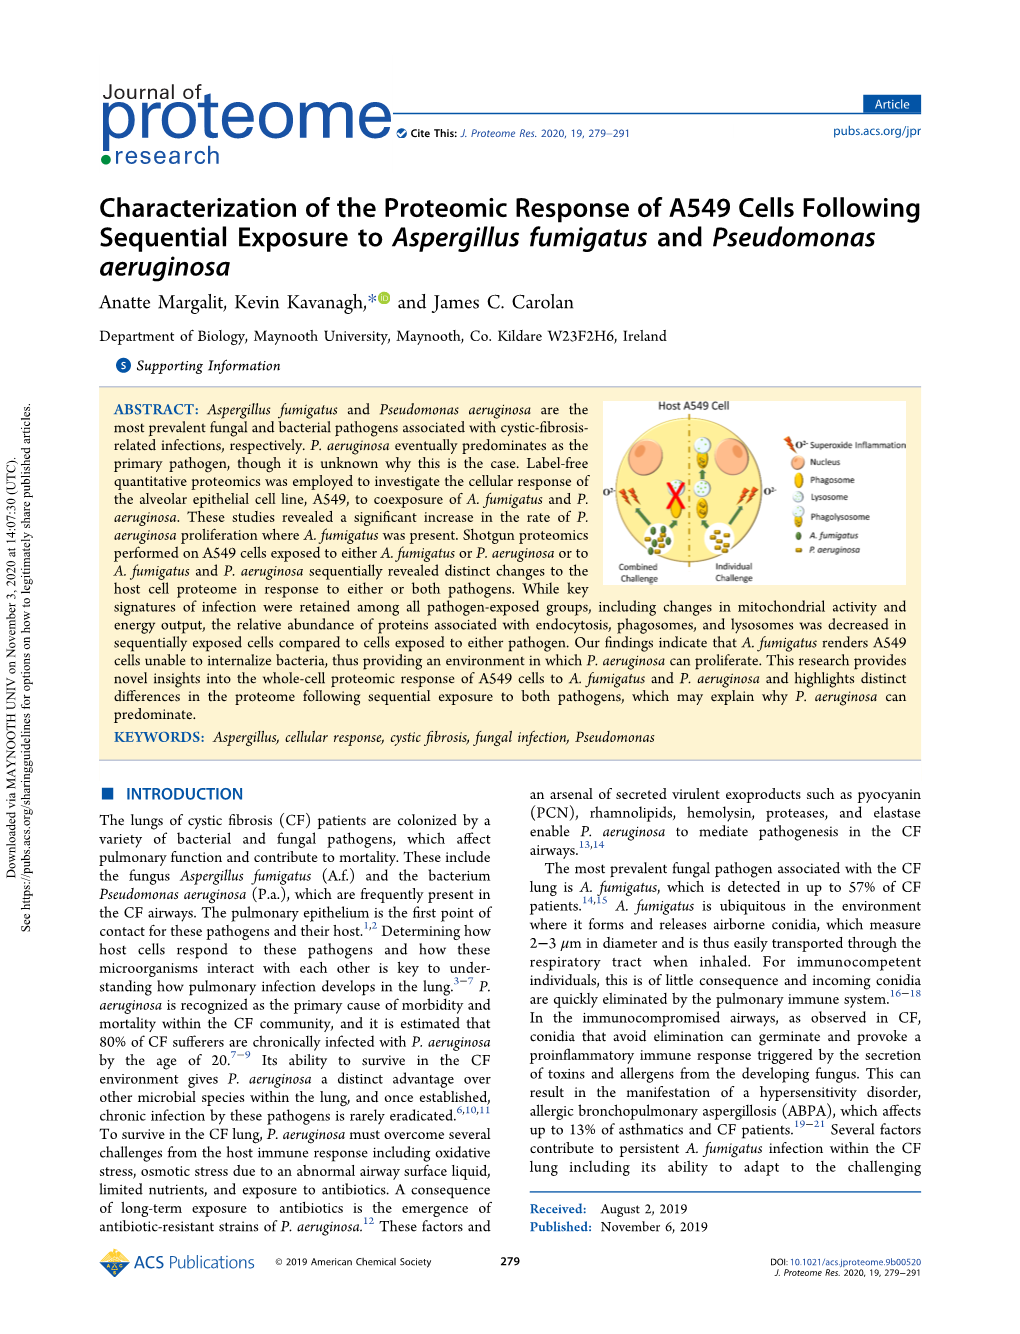 Characterization of the Proteomic Response of A549 Cells Following